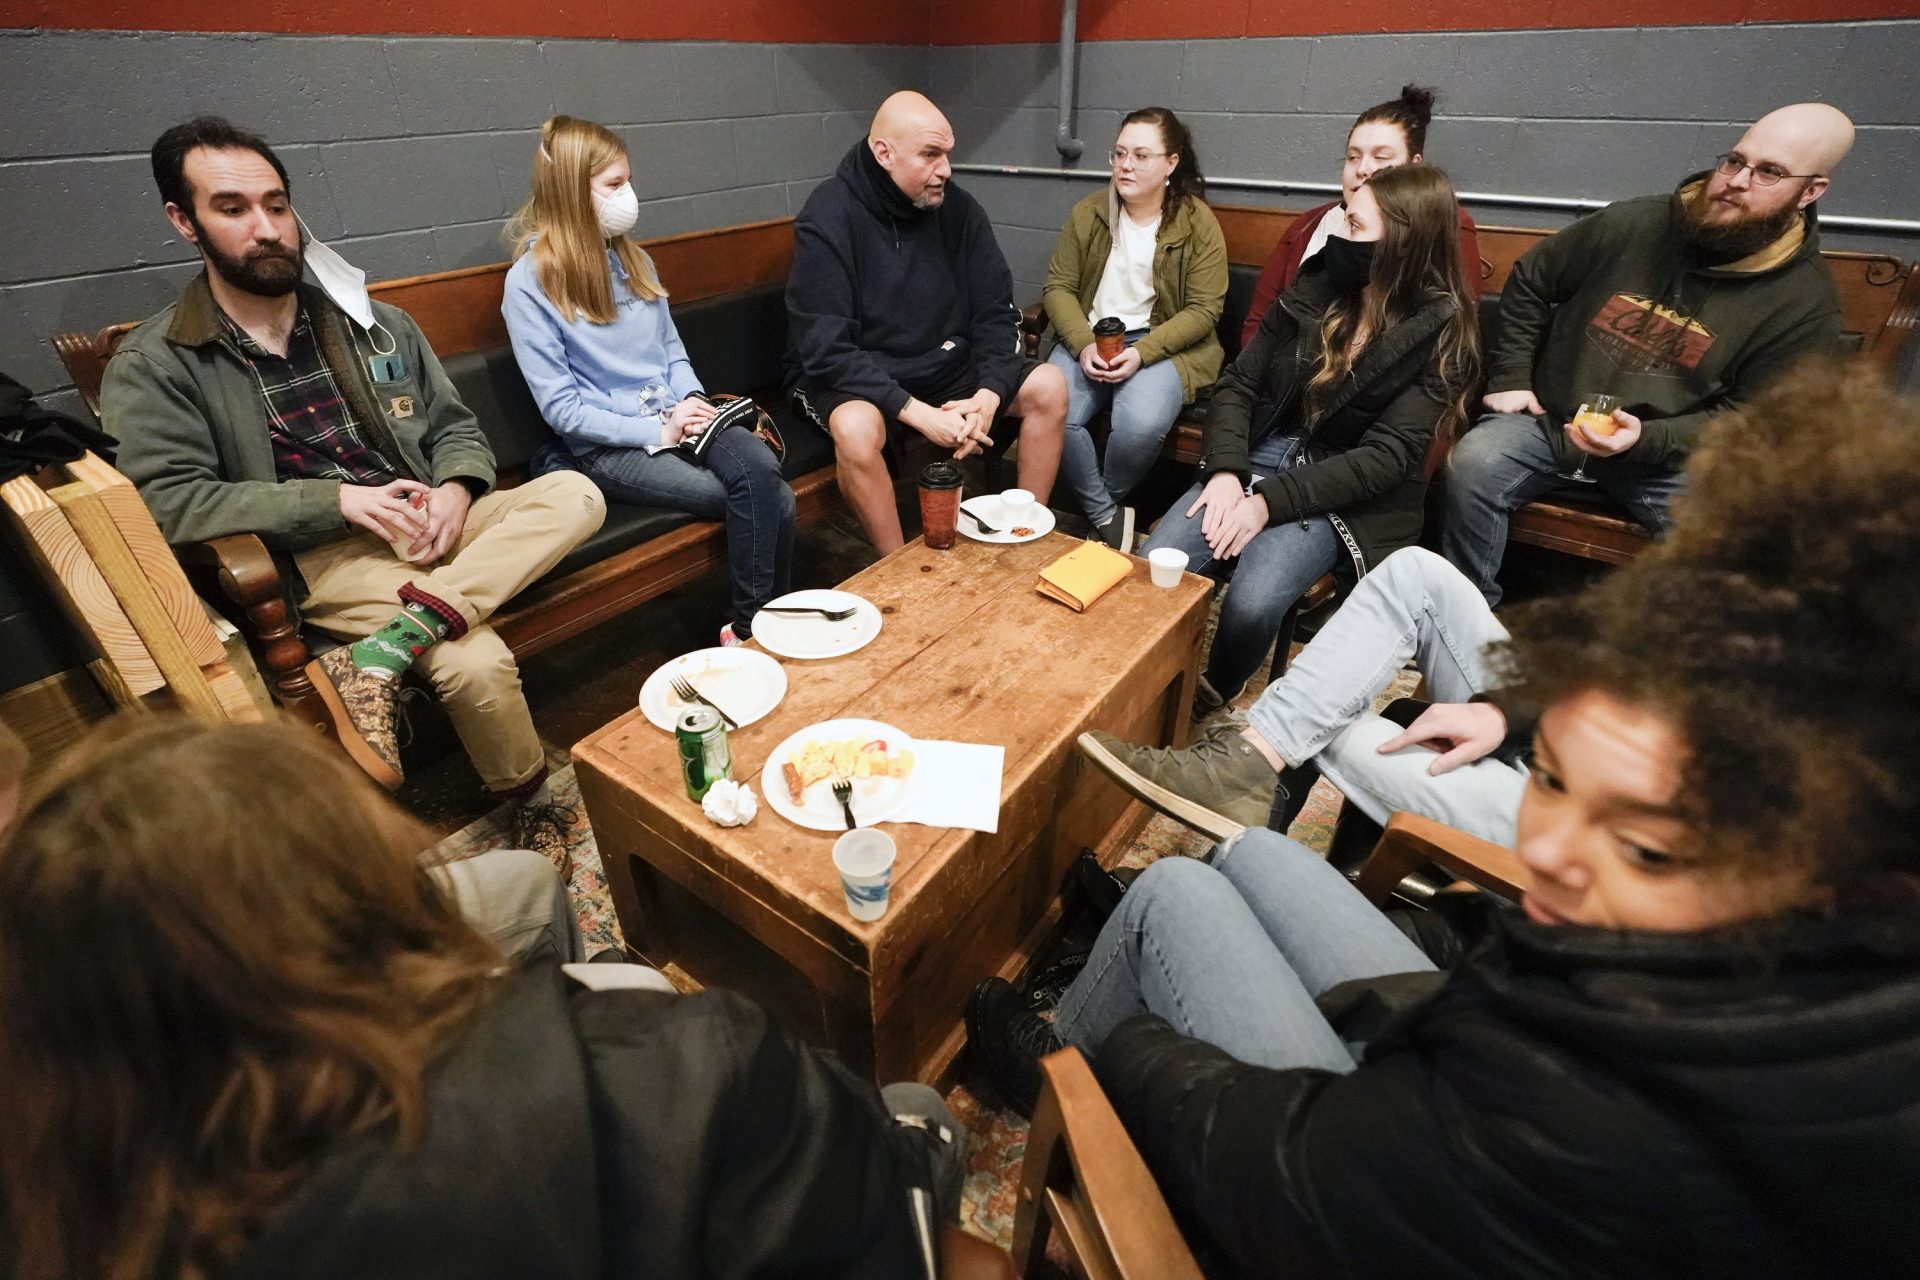 Democratic candidate for the Pennsylvania U.S.senate seat in the 2022 primary election, Lt. Gov. John Fetterman, center, talks with people during a campaign stop at the Mechanistic Brewery, in Clarion, Pa., Saturday, Feb. 12, 2022.